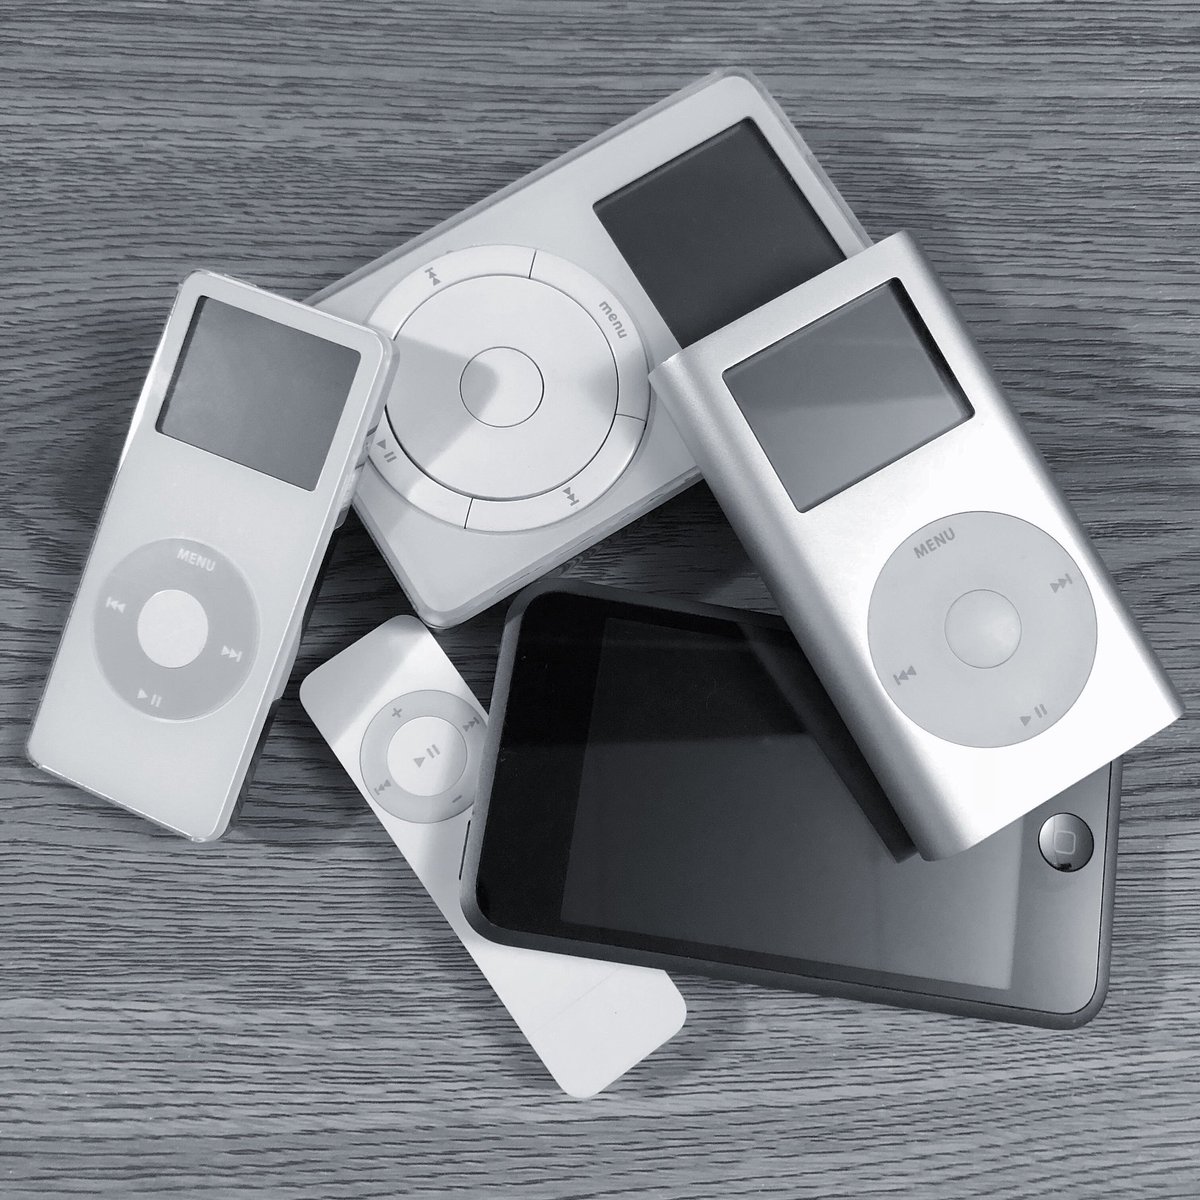 can ipod be formatted for windows and mac ?